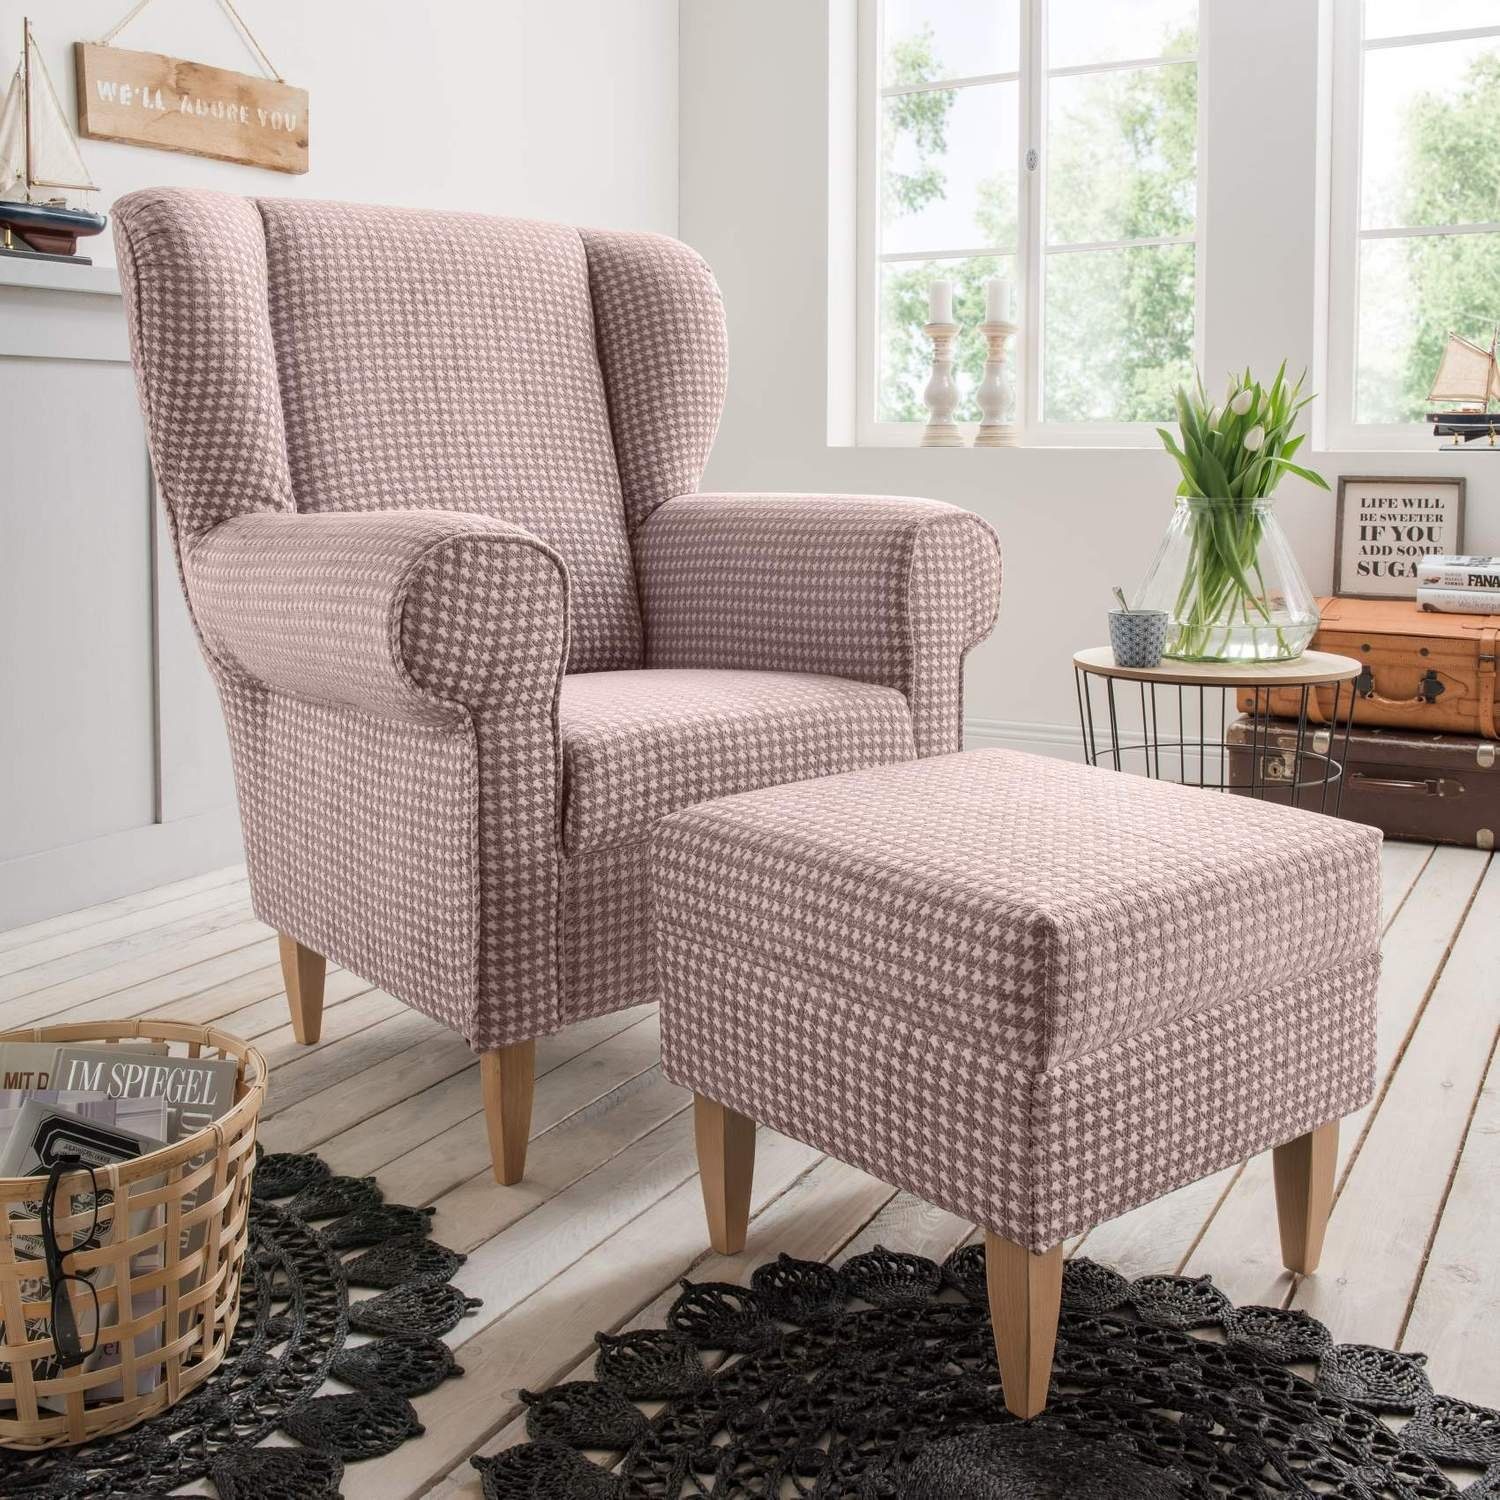 Loungesessel Stoff COLLECTION Flamingo AVERSA Polstersessel Ohrensessel HOME BENFORMATO Talento